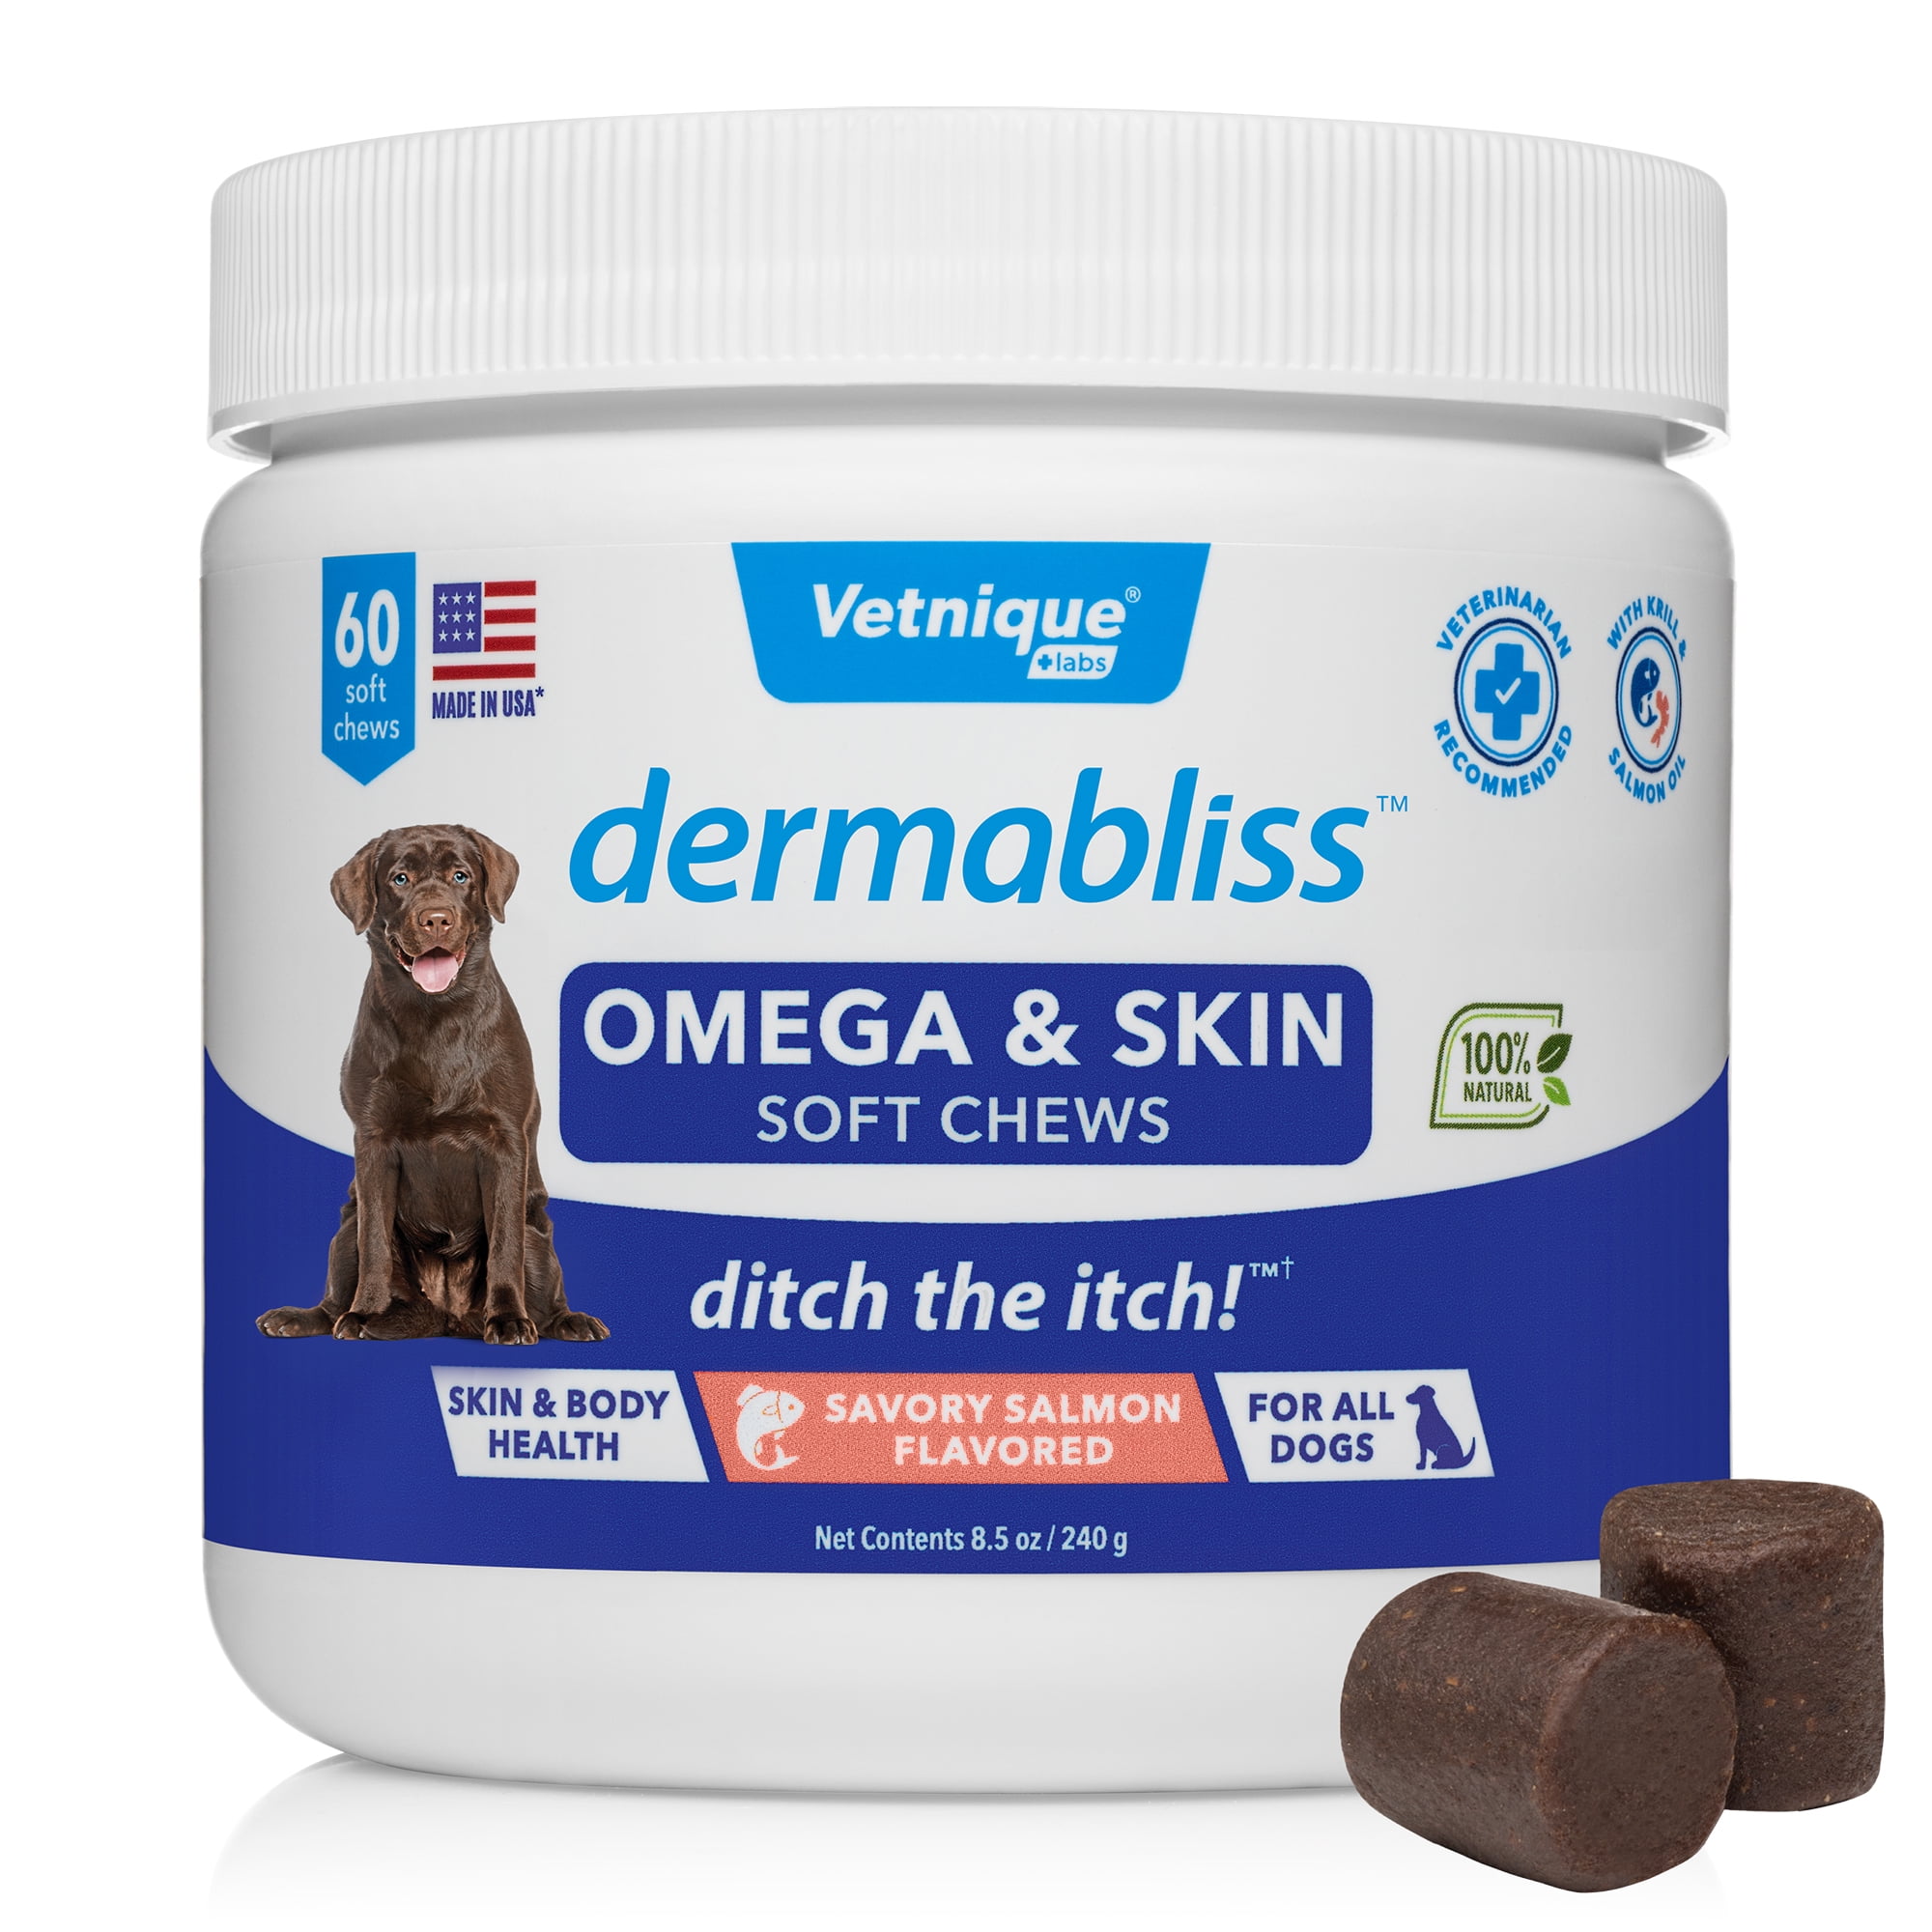 Vetnique Labs Dermabliss Omega & Skin Health Chews for Dogs with Omega 3-6-9  - Ditch the Itch - 60ct Hickory Salmon Flavored Soft Chews 